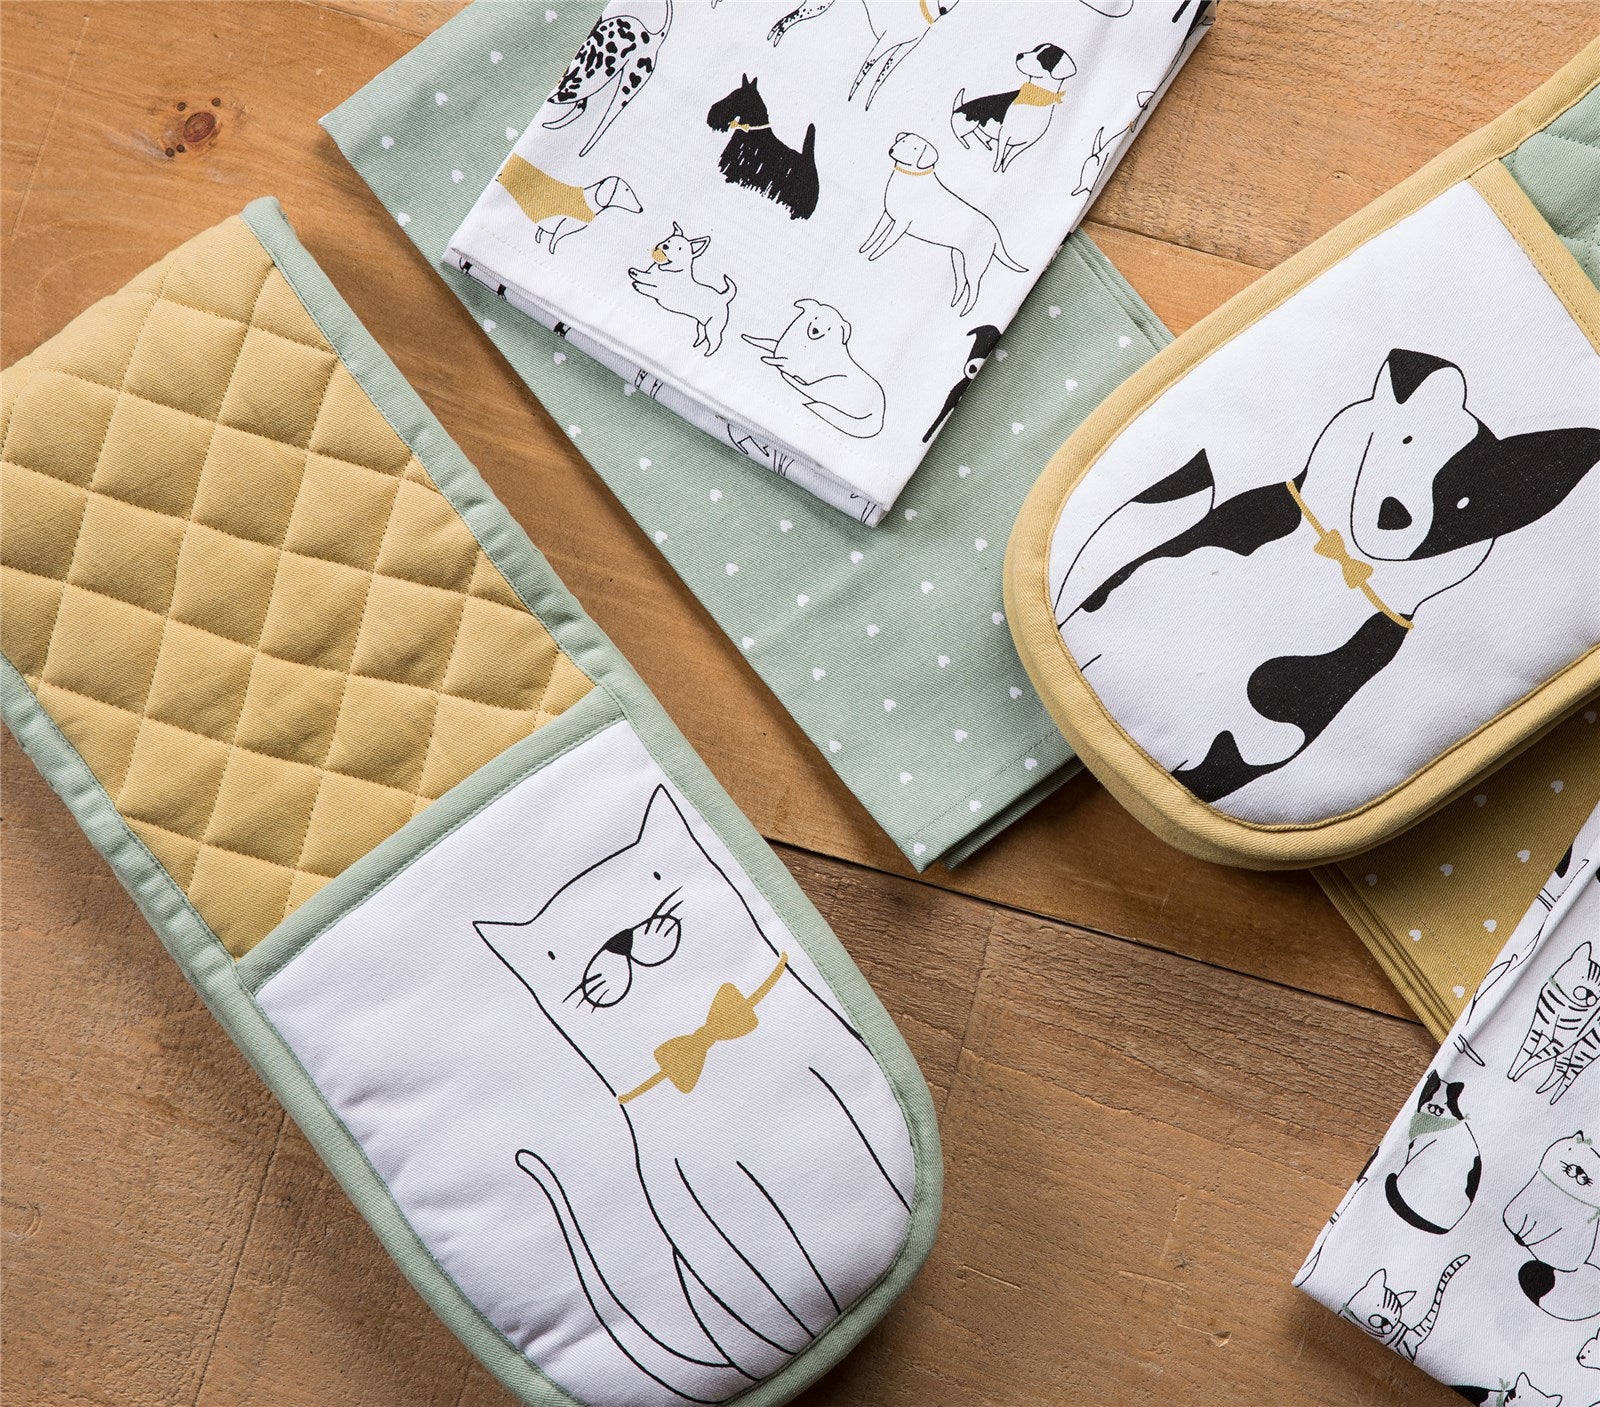 The English Tableware Company Playful Pets Cat Double Oven Glove